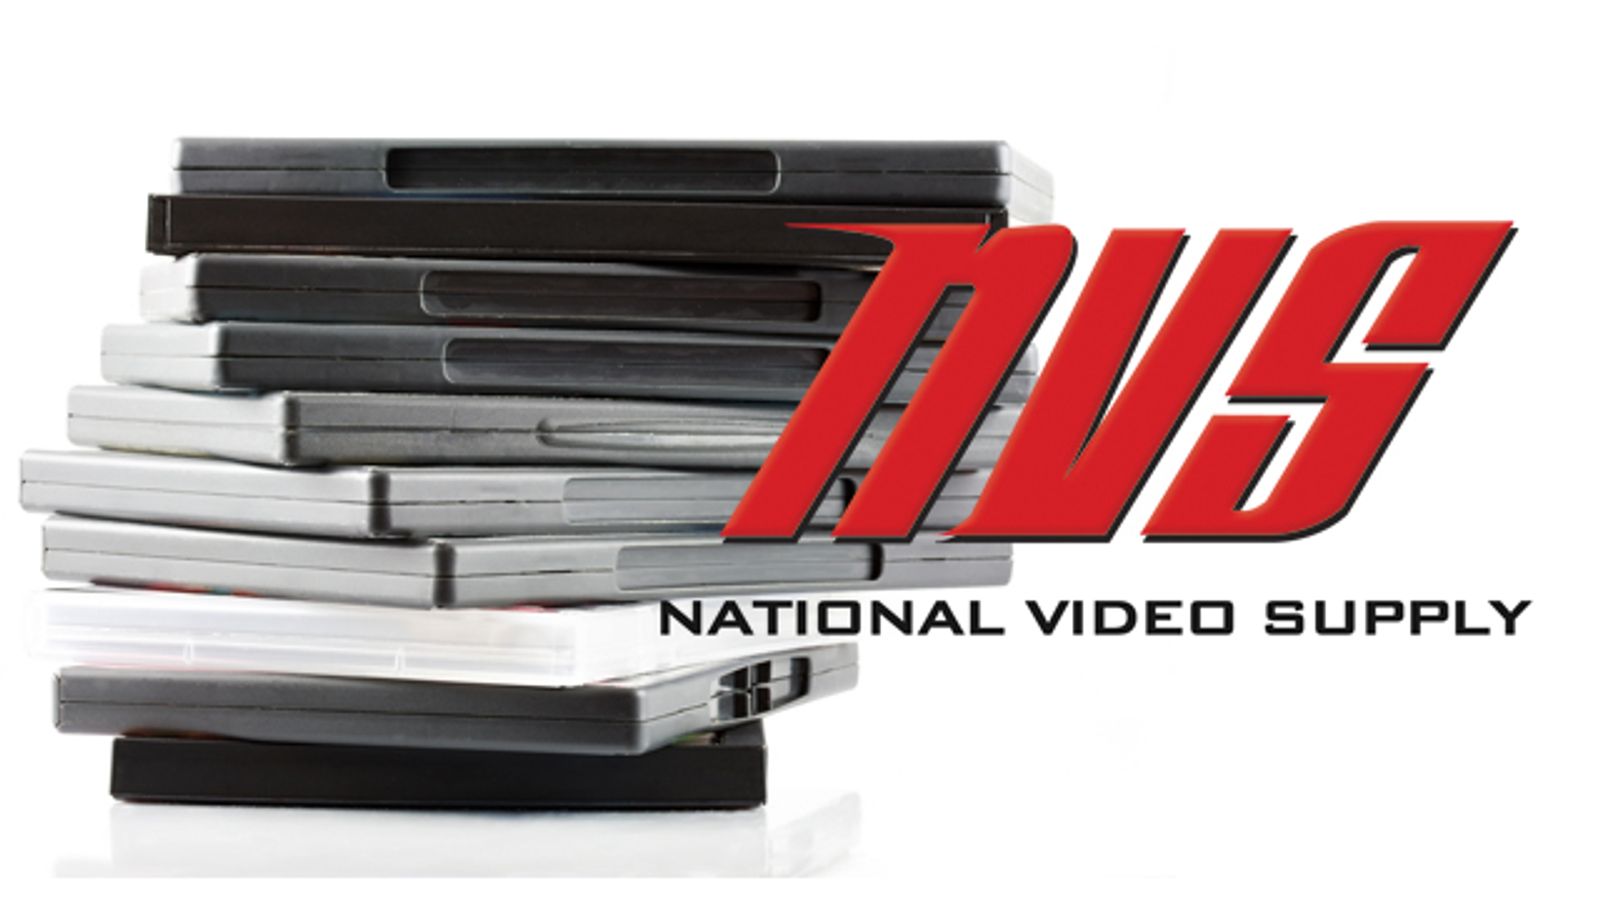 National Video Supply Expands Sales Force